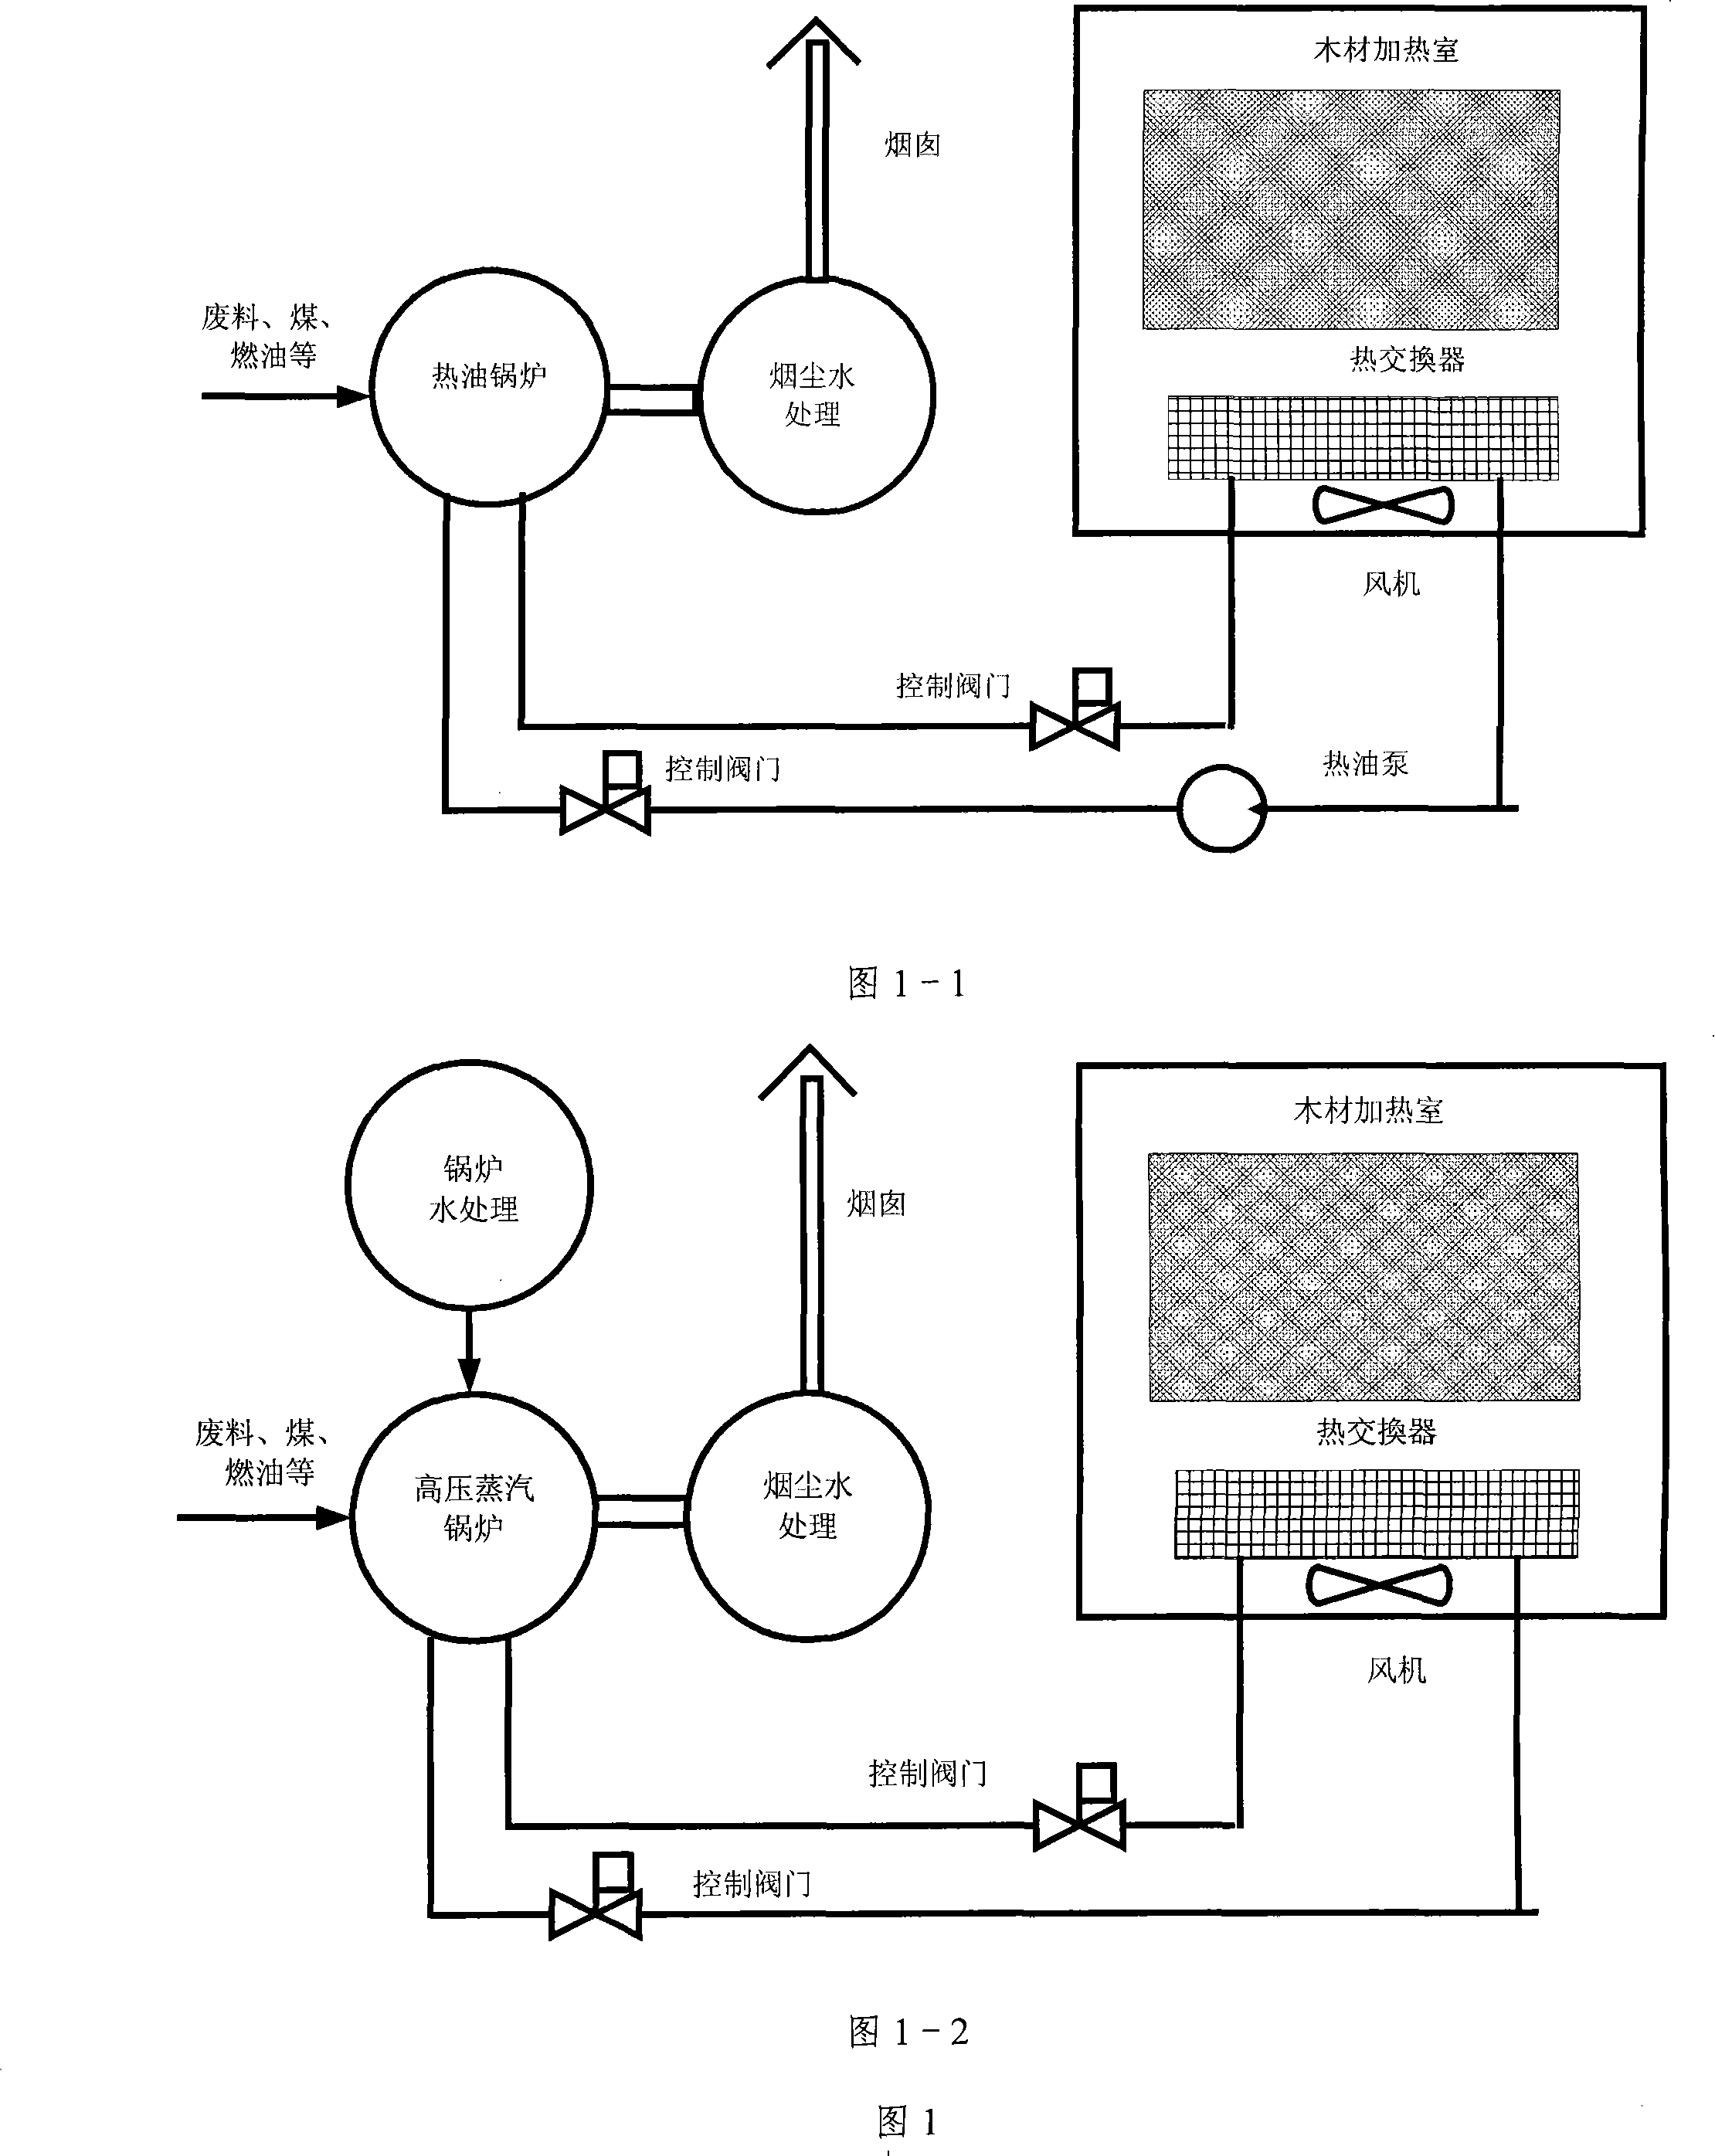 Wood electrothermal high-temperature processing device and heat treating device with combination drying function